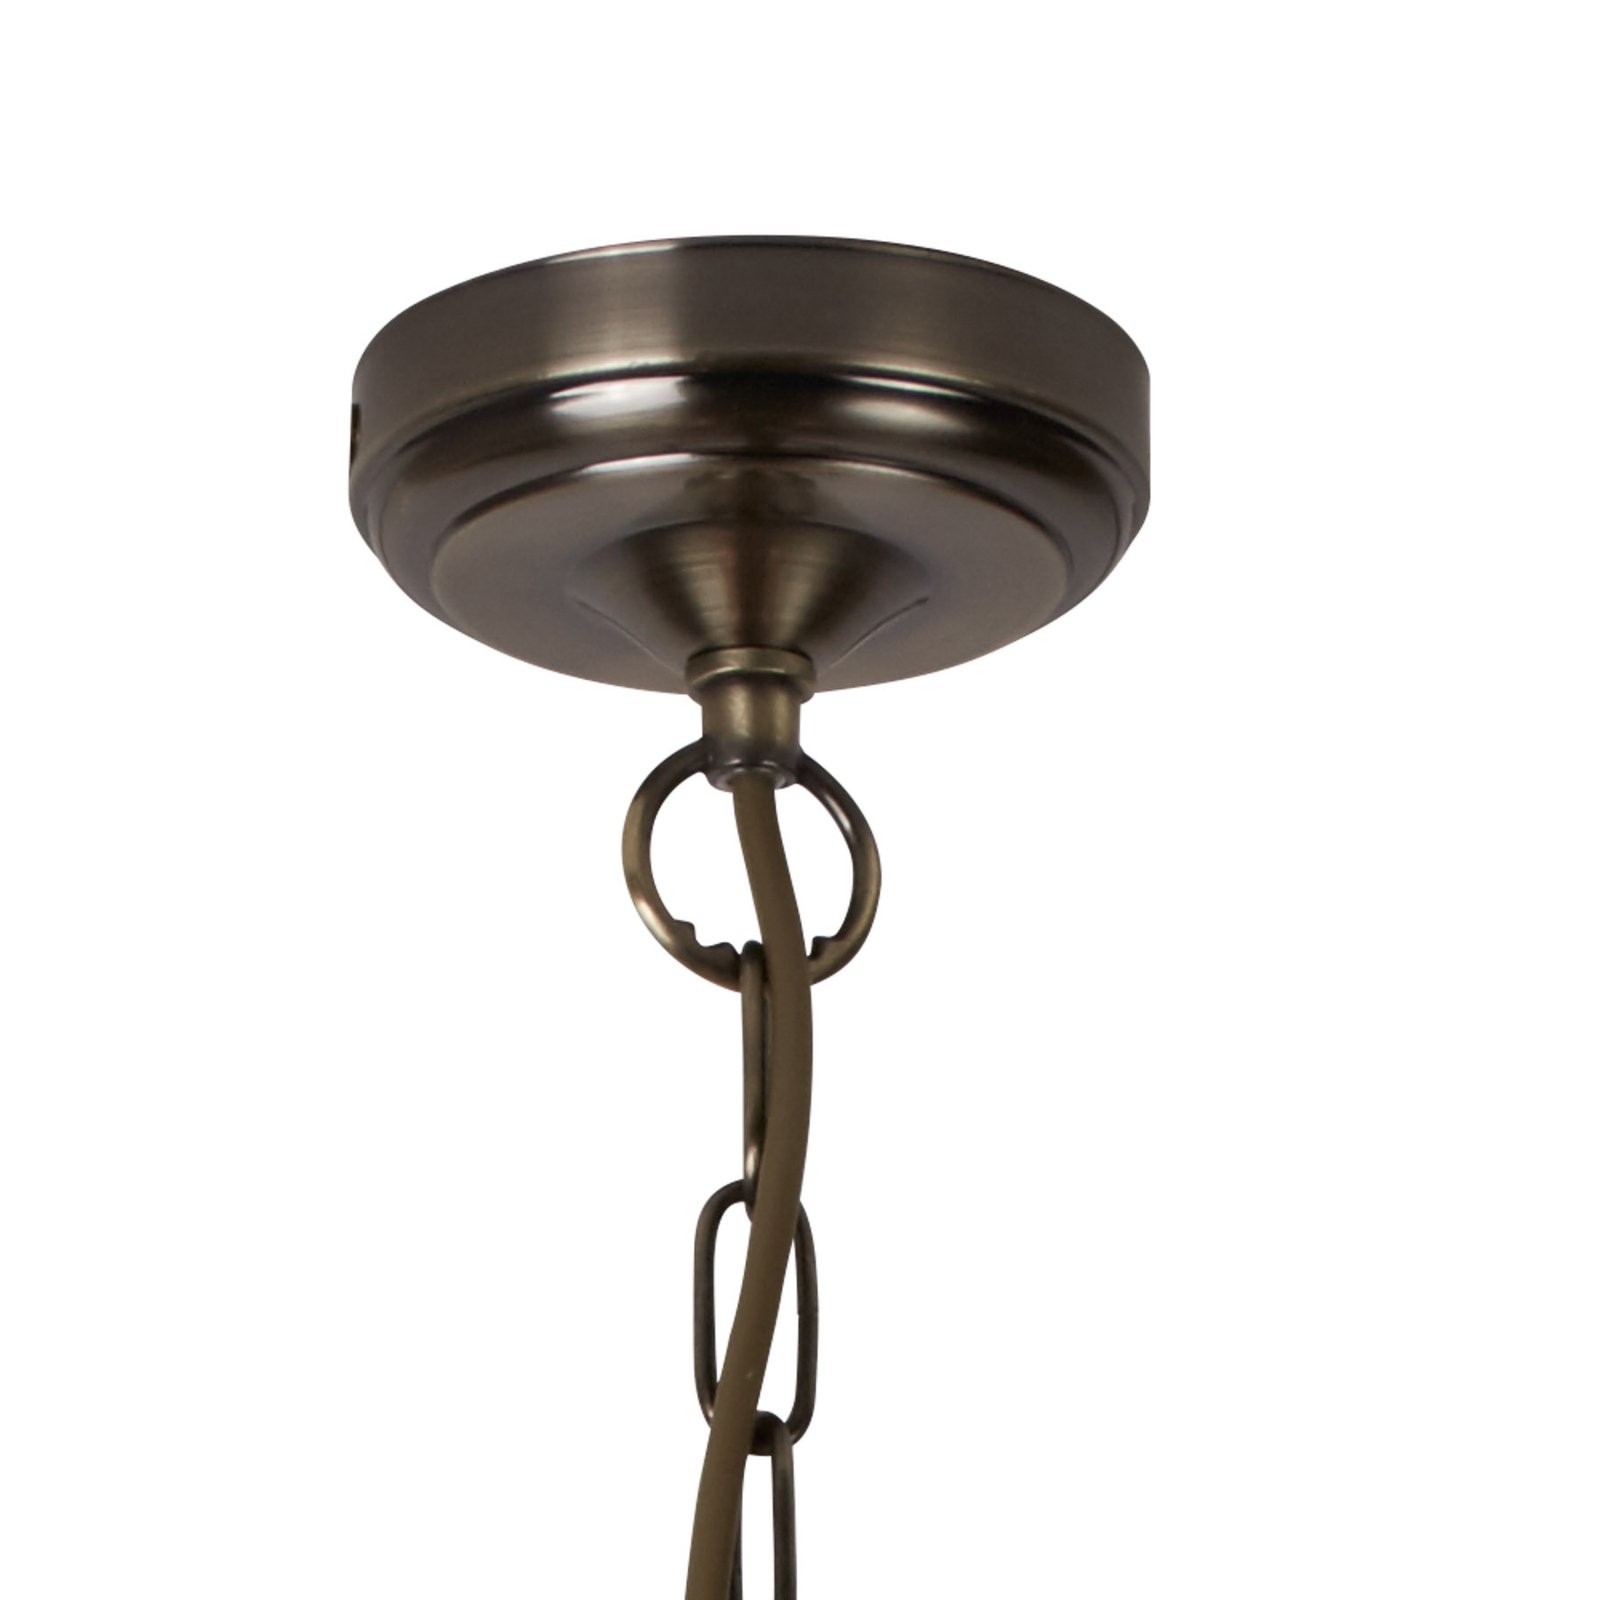 Classic/antique styled Bistro II hanging lamp